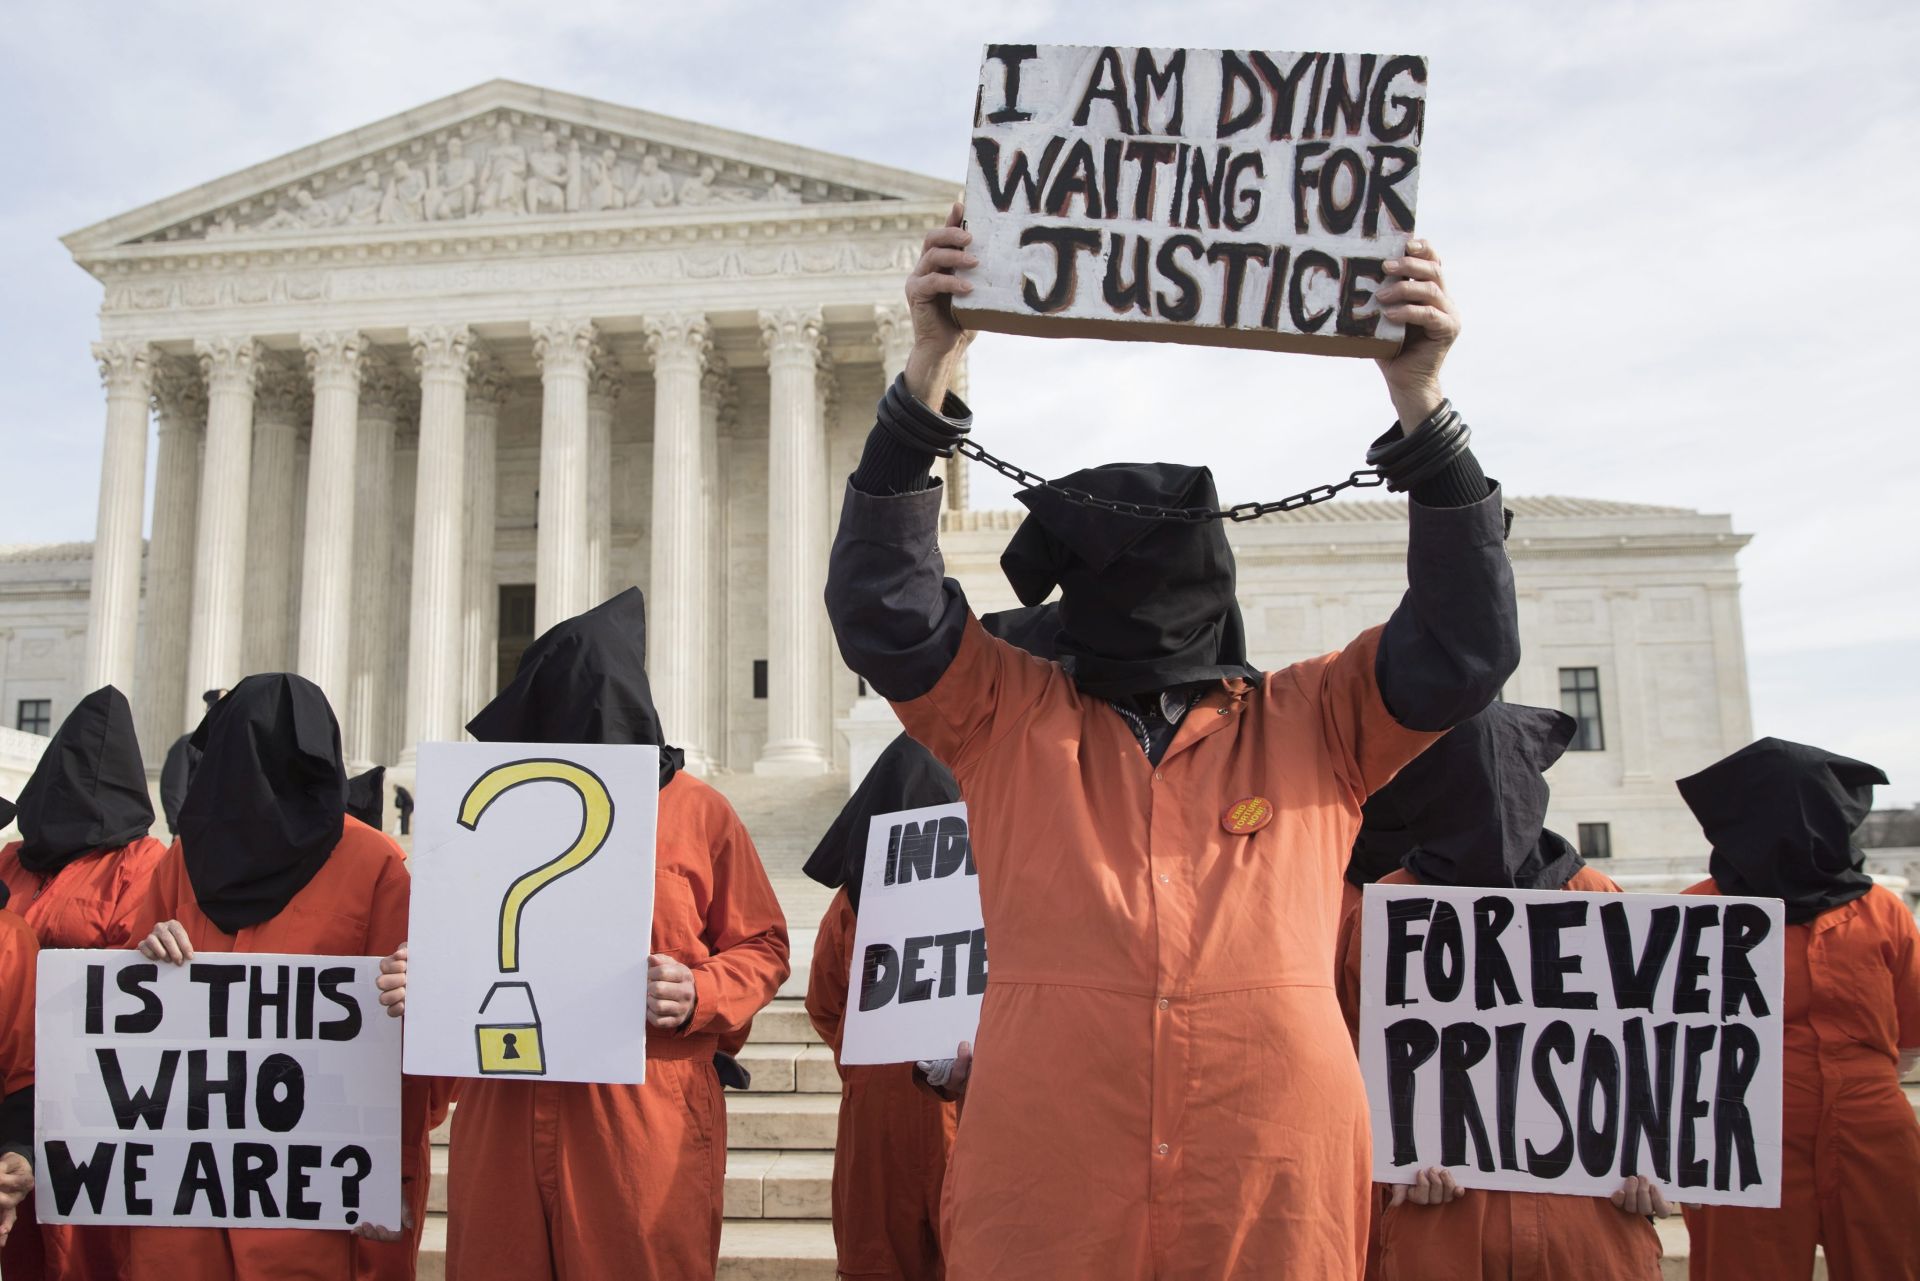 epa05711436 Protesters urge for the closure of Guantanamo Bay detention camp, outside the US Supreme Court in Washington, DC, USA, 11 January 2017. The closure of Guantanamo Bay detention camp was a promise made by Barack Obama during his first campaign for the presidency. The inmate population in the facility has been been greatly reduced but the effort to close it was blocked by Congress during Obama's first year as President.  EPA/MICHAEL REYNOLDS